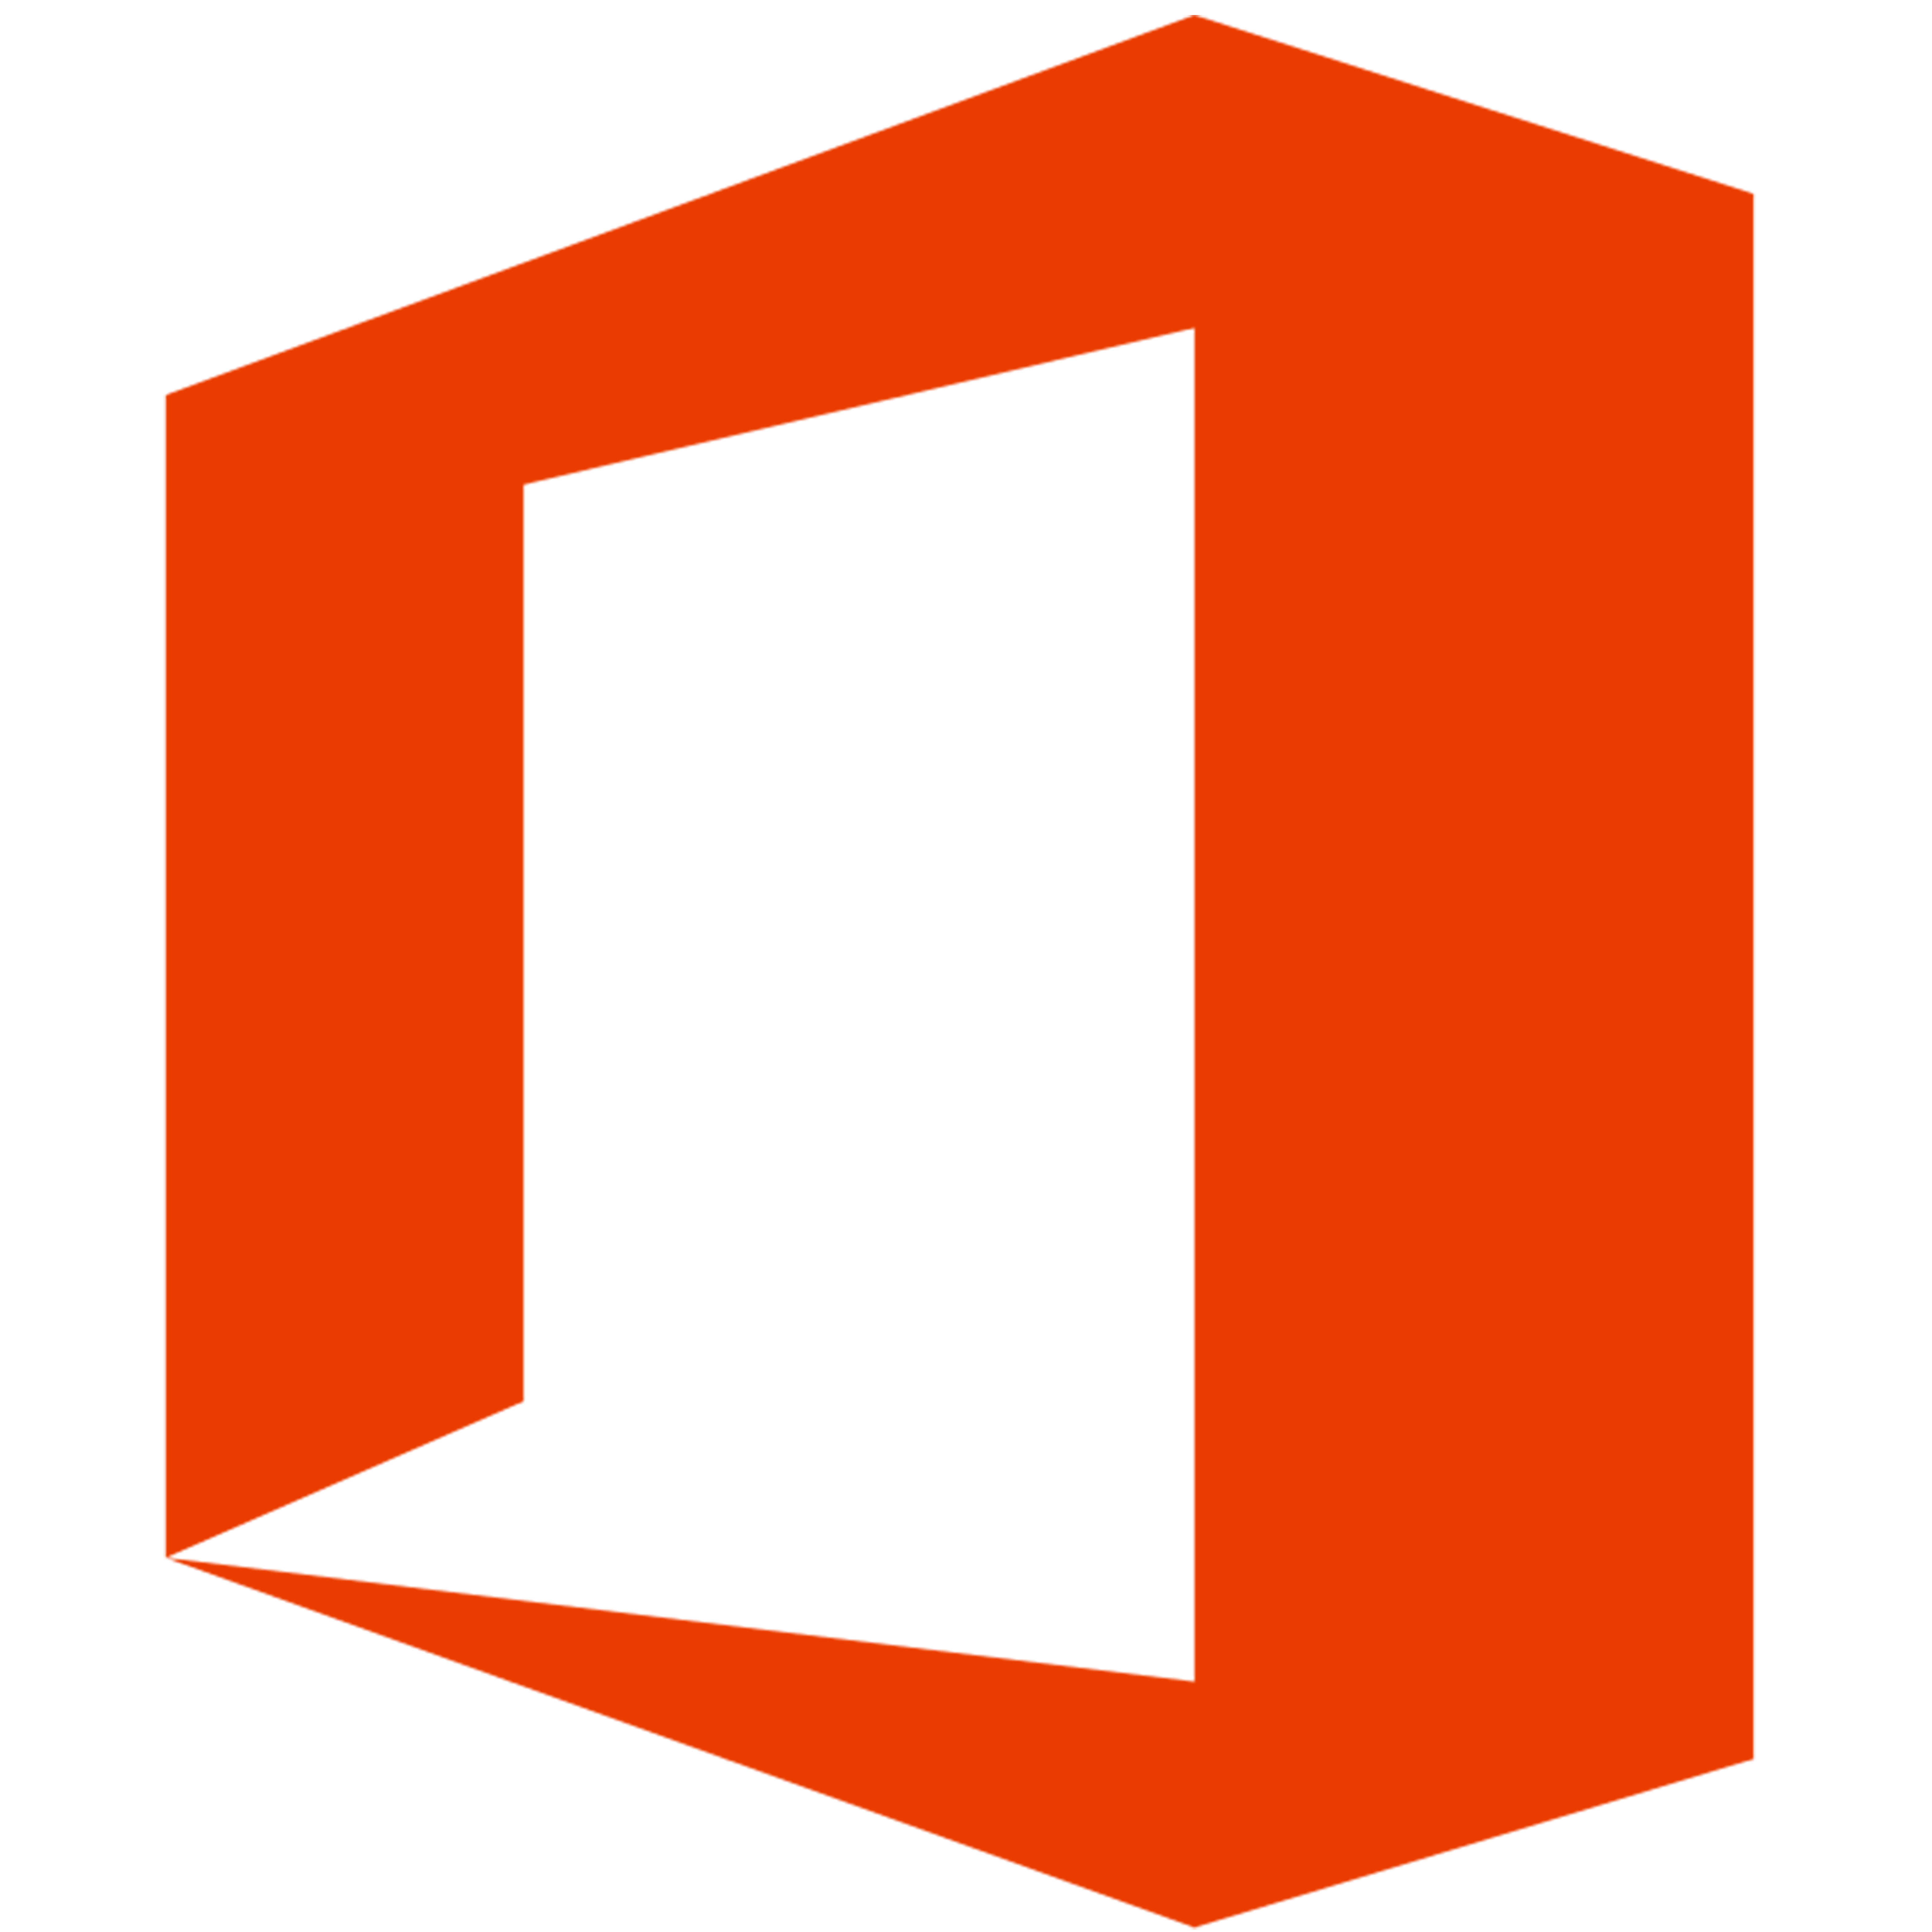 An icon representing Microsoft Office Suite